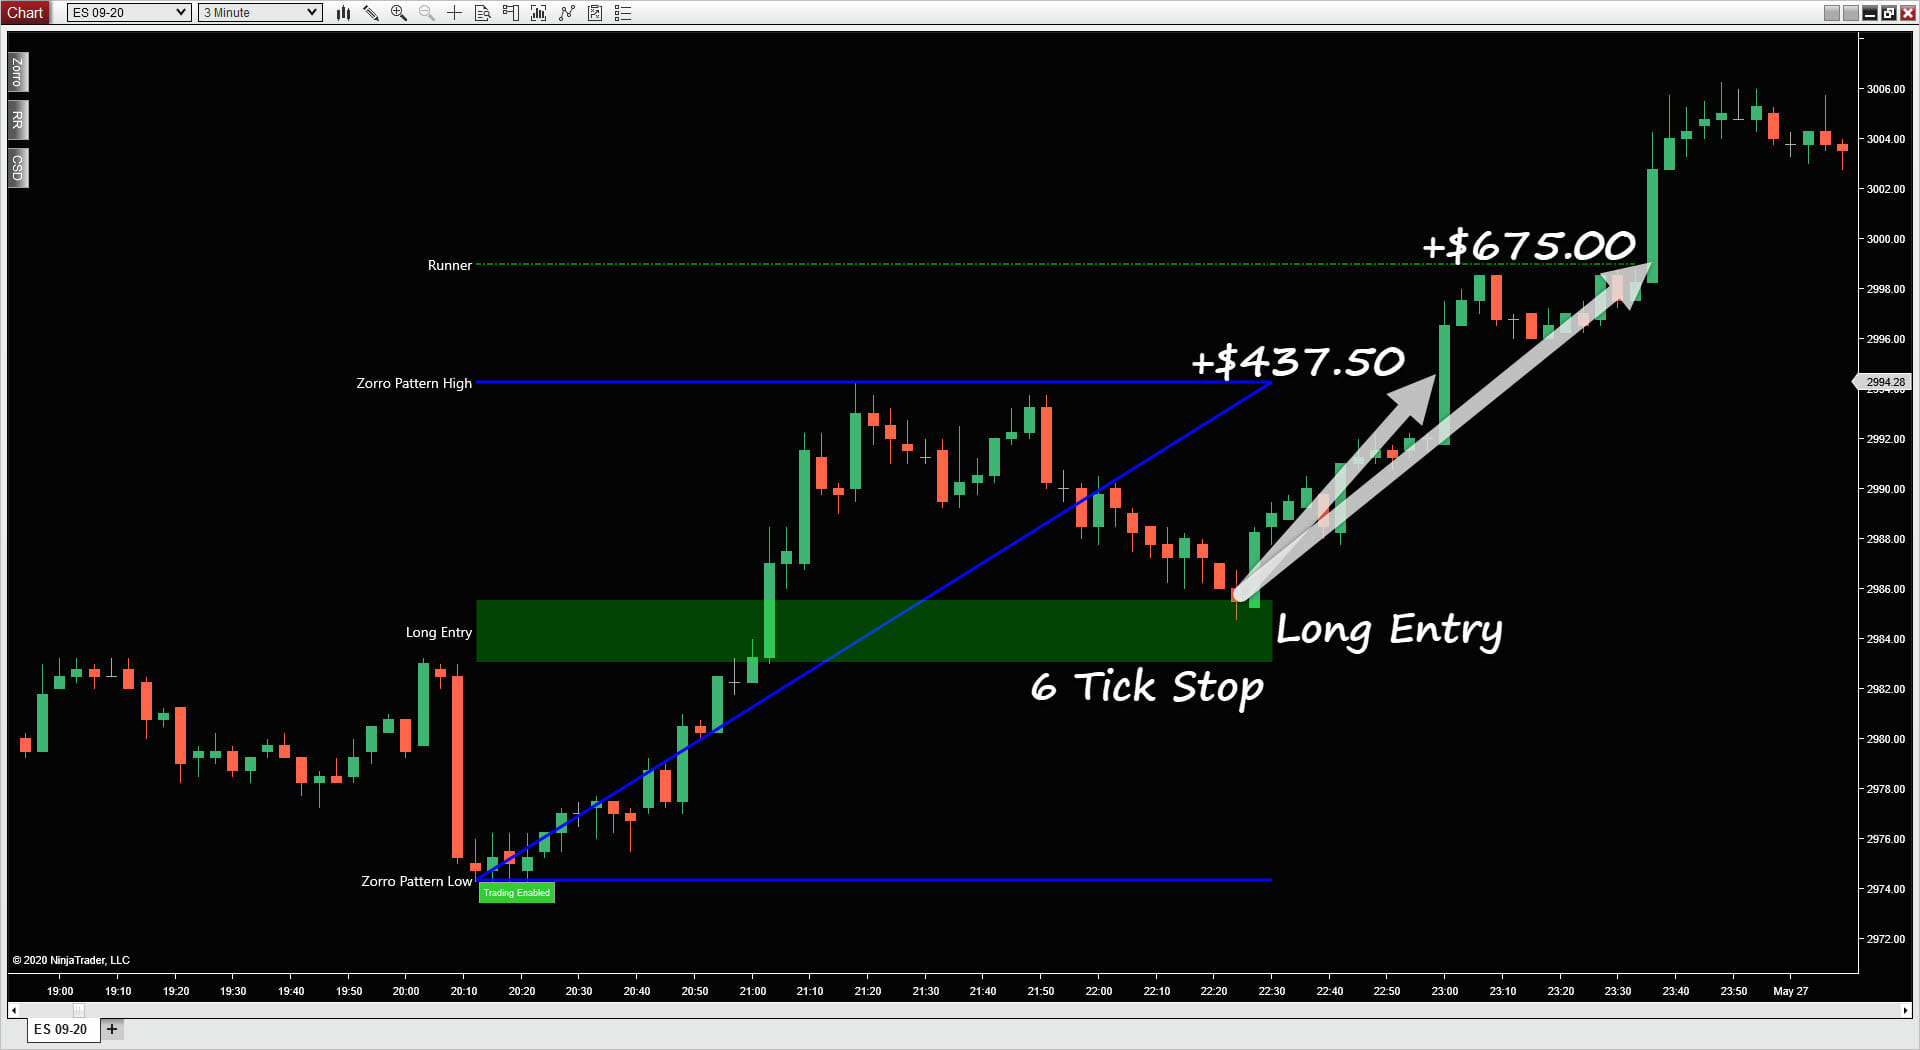 Zorro trading strategy for long entry with a 6 tick stop.